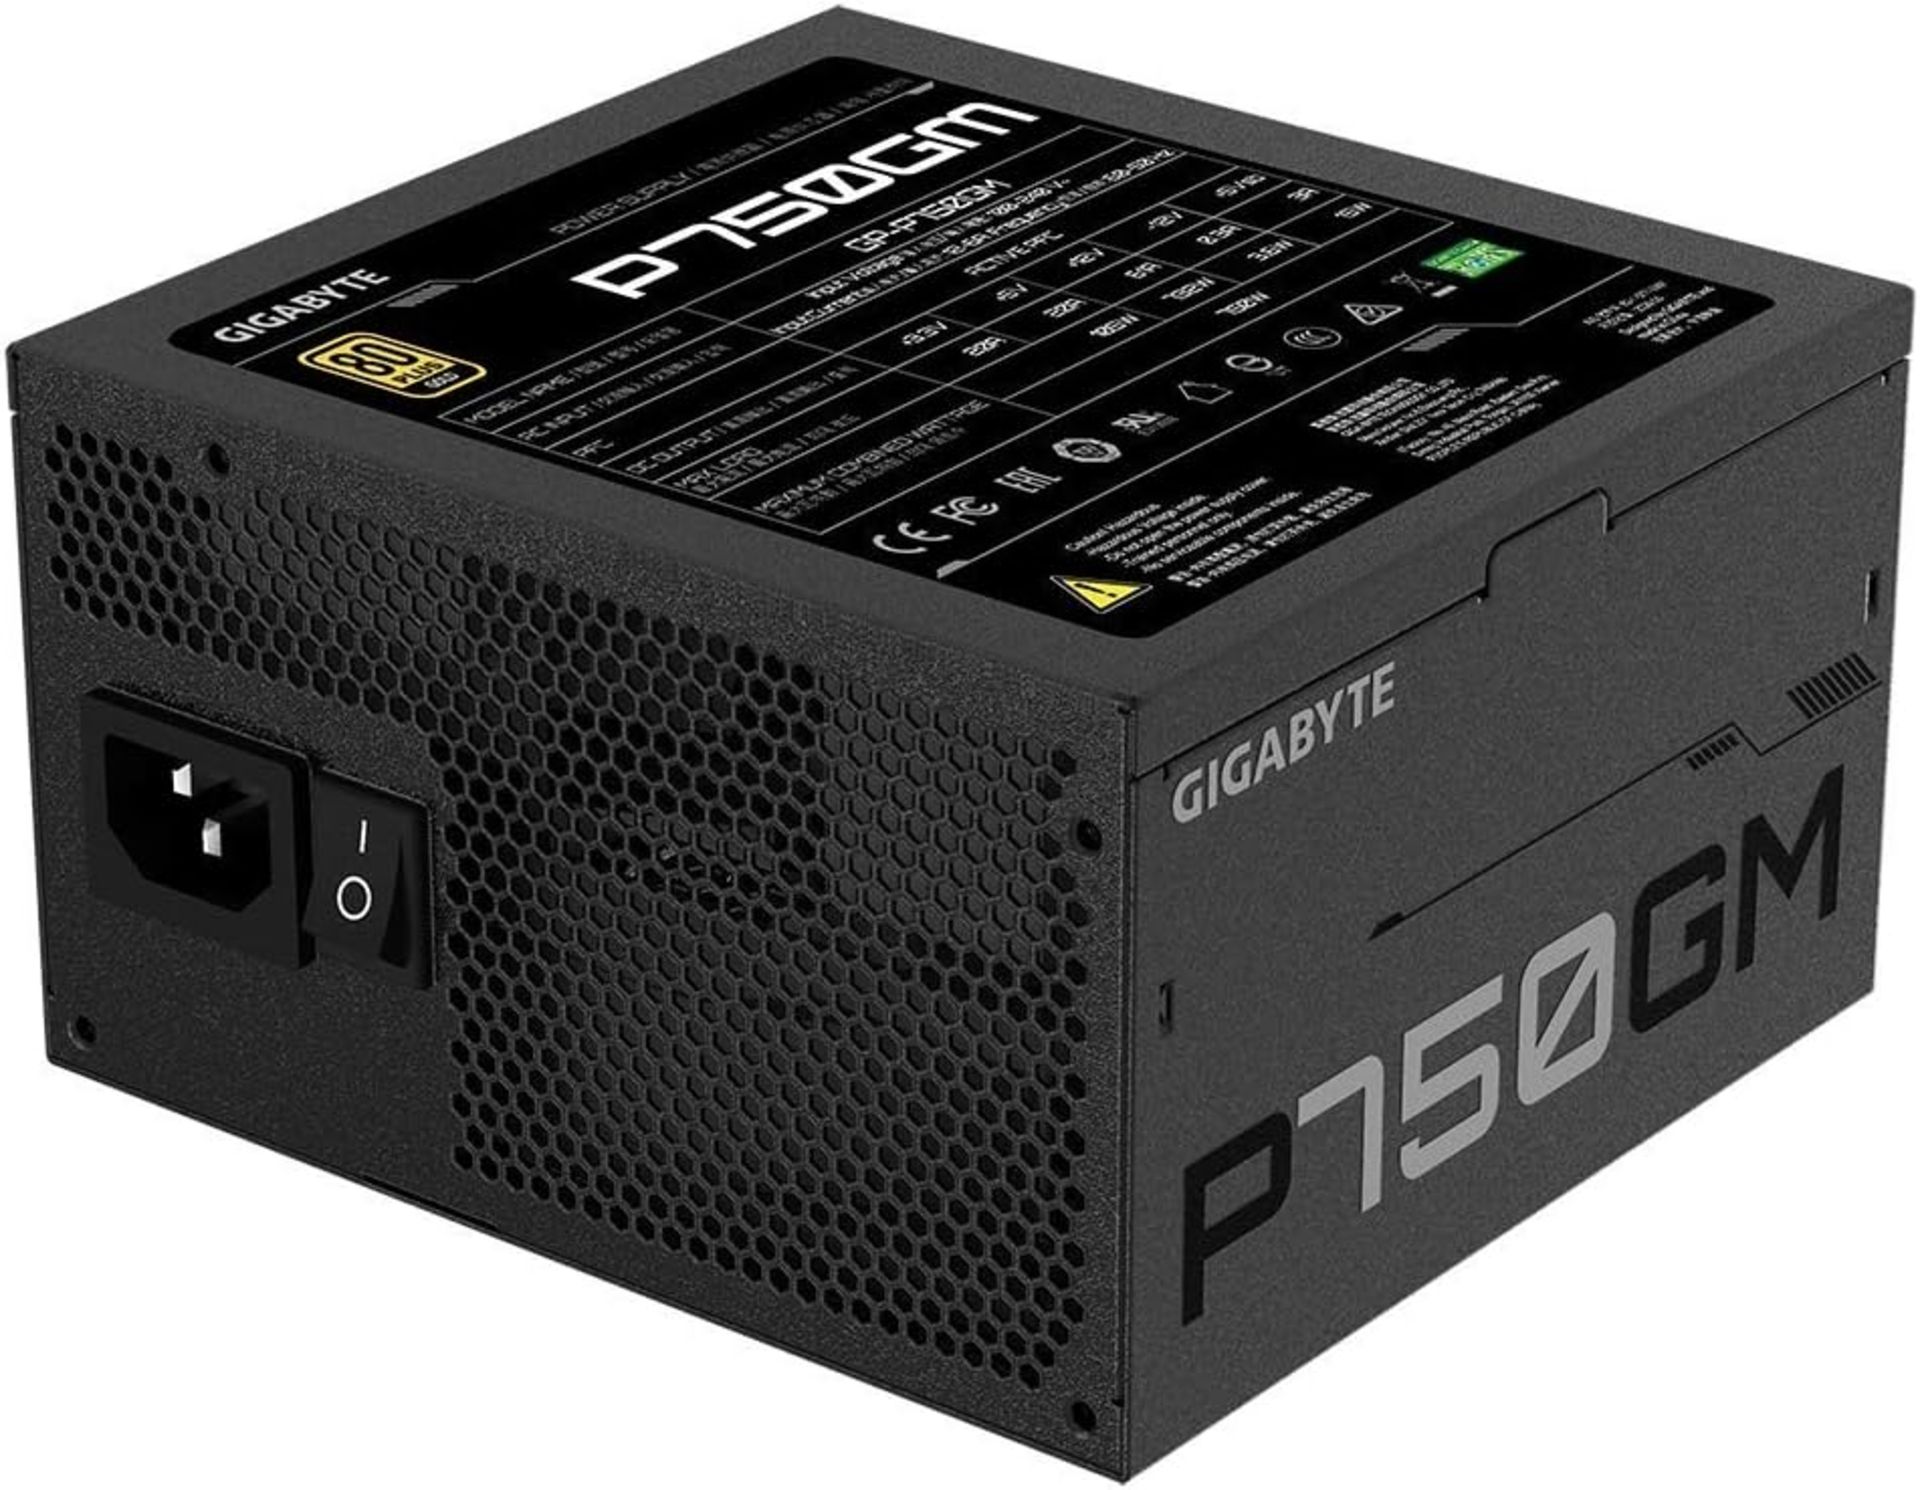 BRAND NEW FACTORY SEALED GIGABYTE P750GM 750w 80 Plus Gold Fully Modular Power Supply. RRP £84.99. - Image 4 of 6